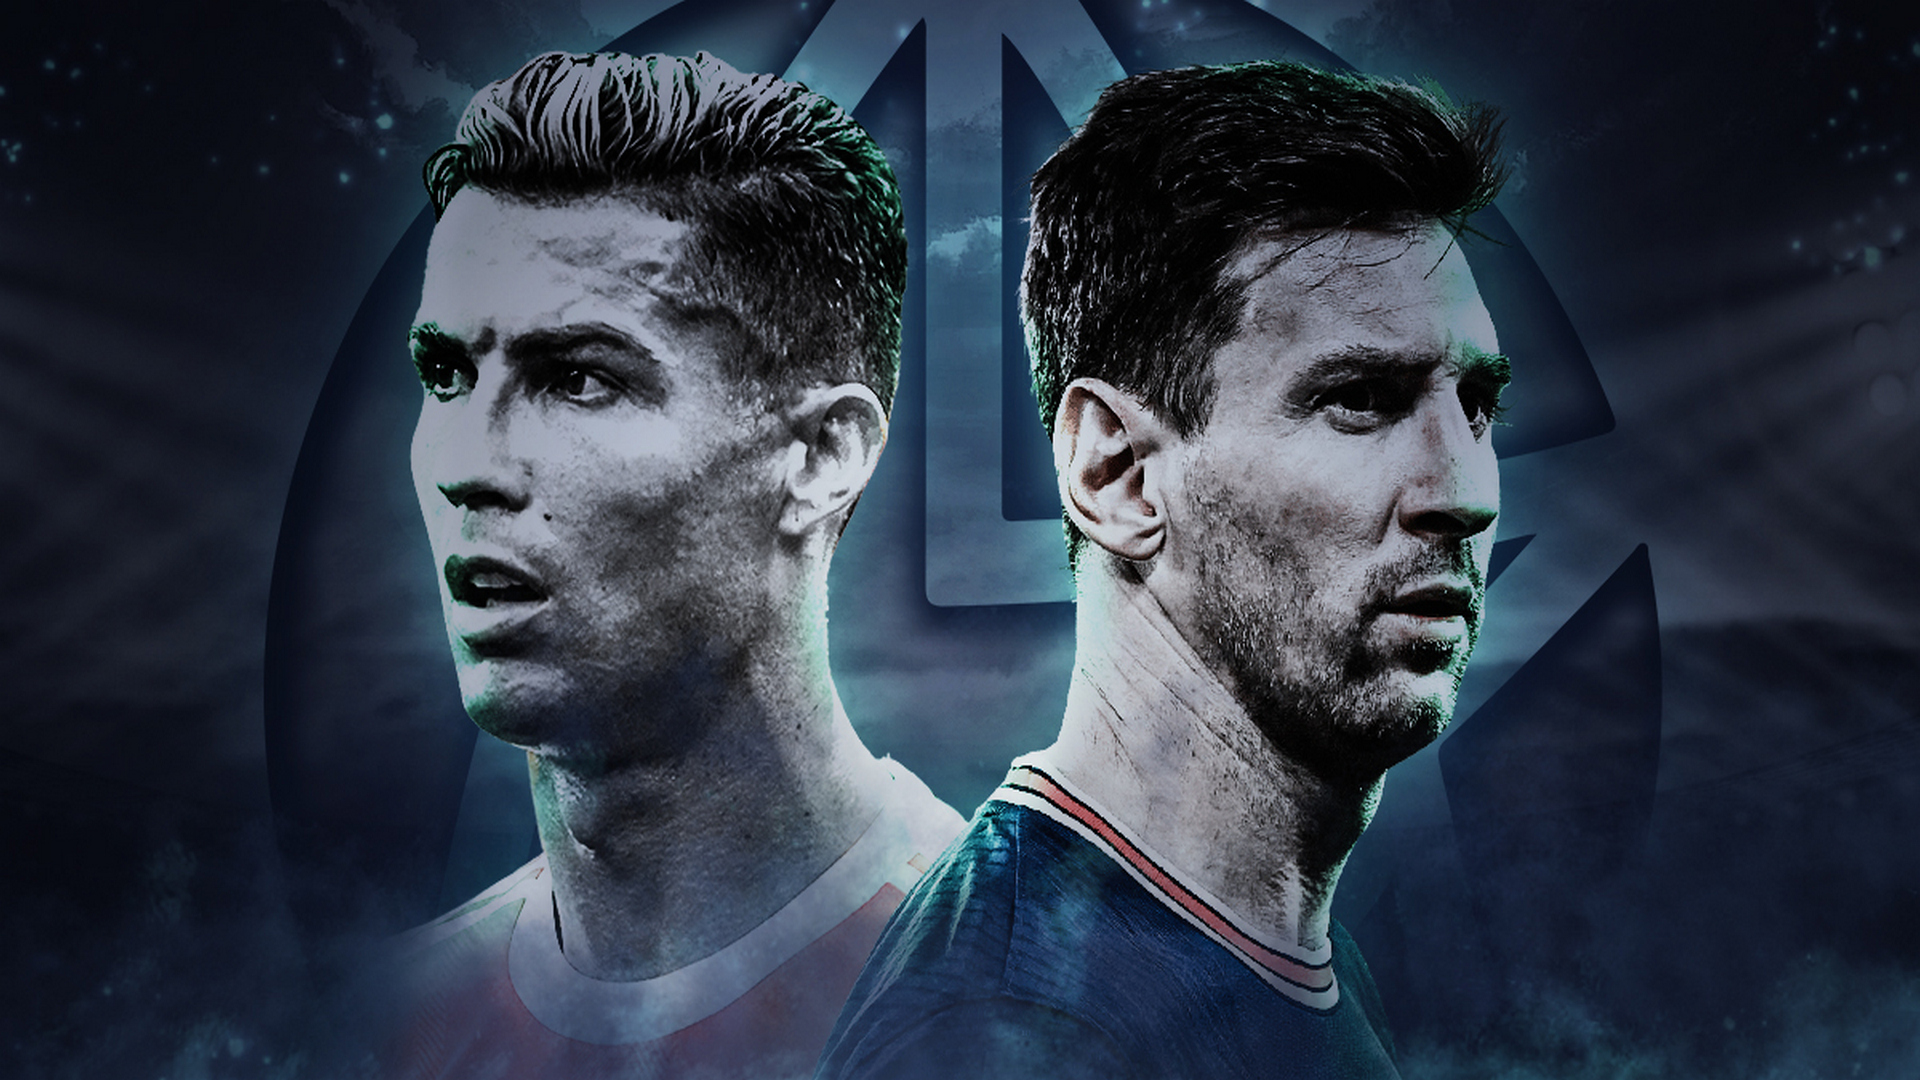 Highest goal scorers in the Champions League - Ronaldo and Messi